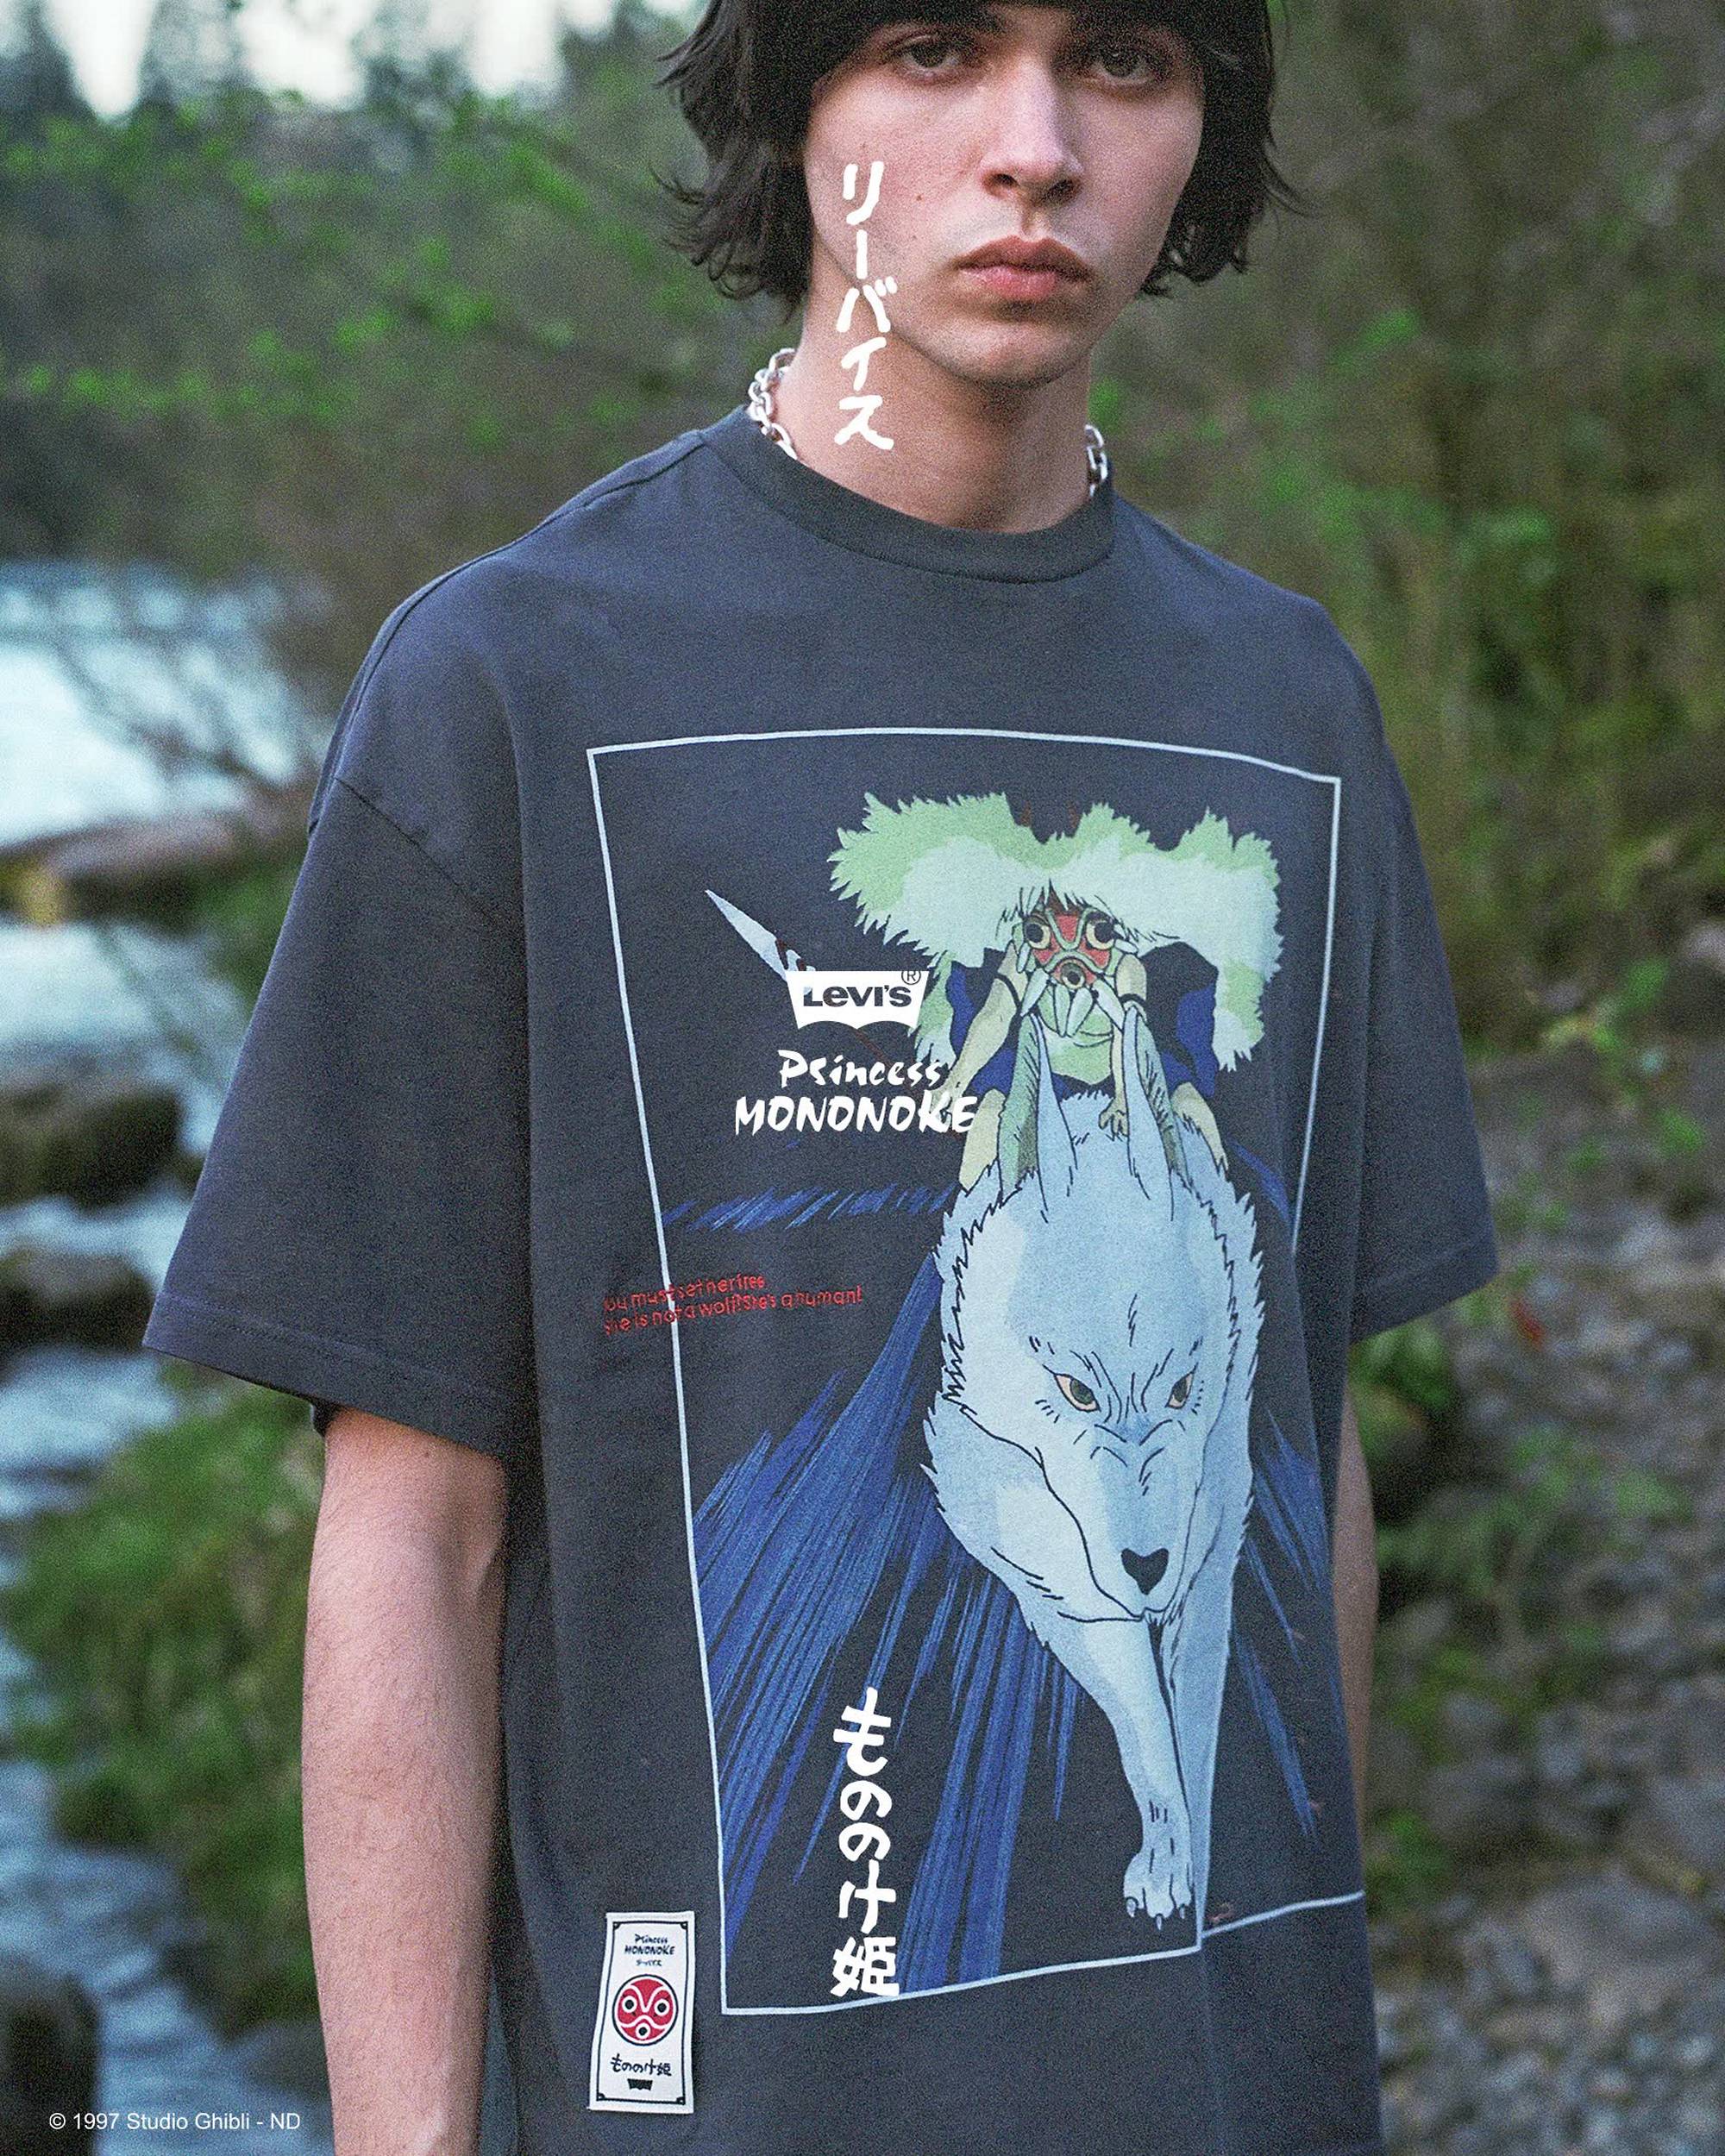 Video of man and woman posing in Levi's® x Princess Mononoke clothing against beautiful forest setting